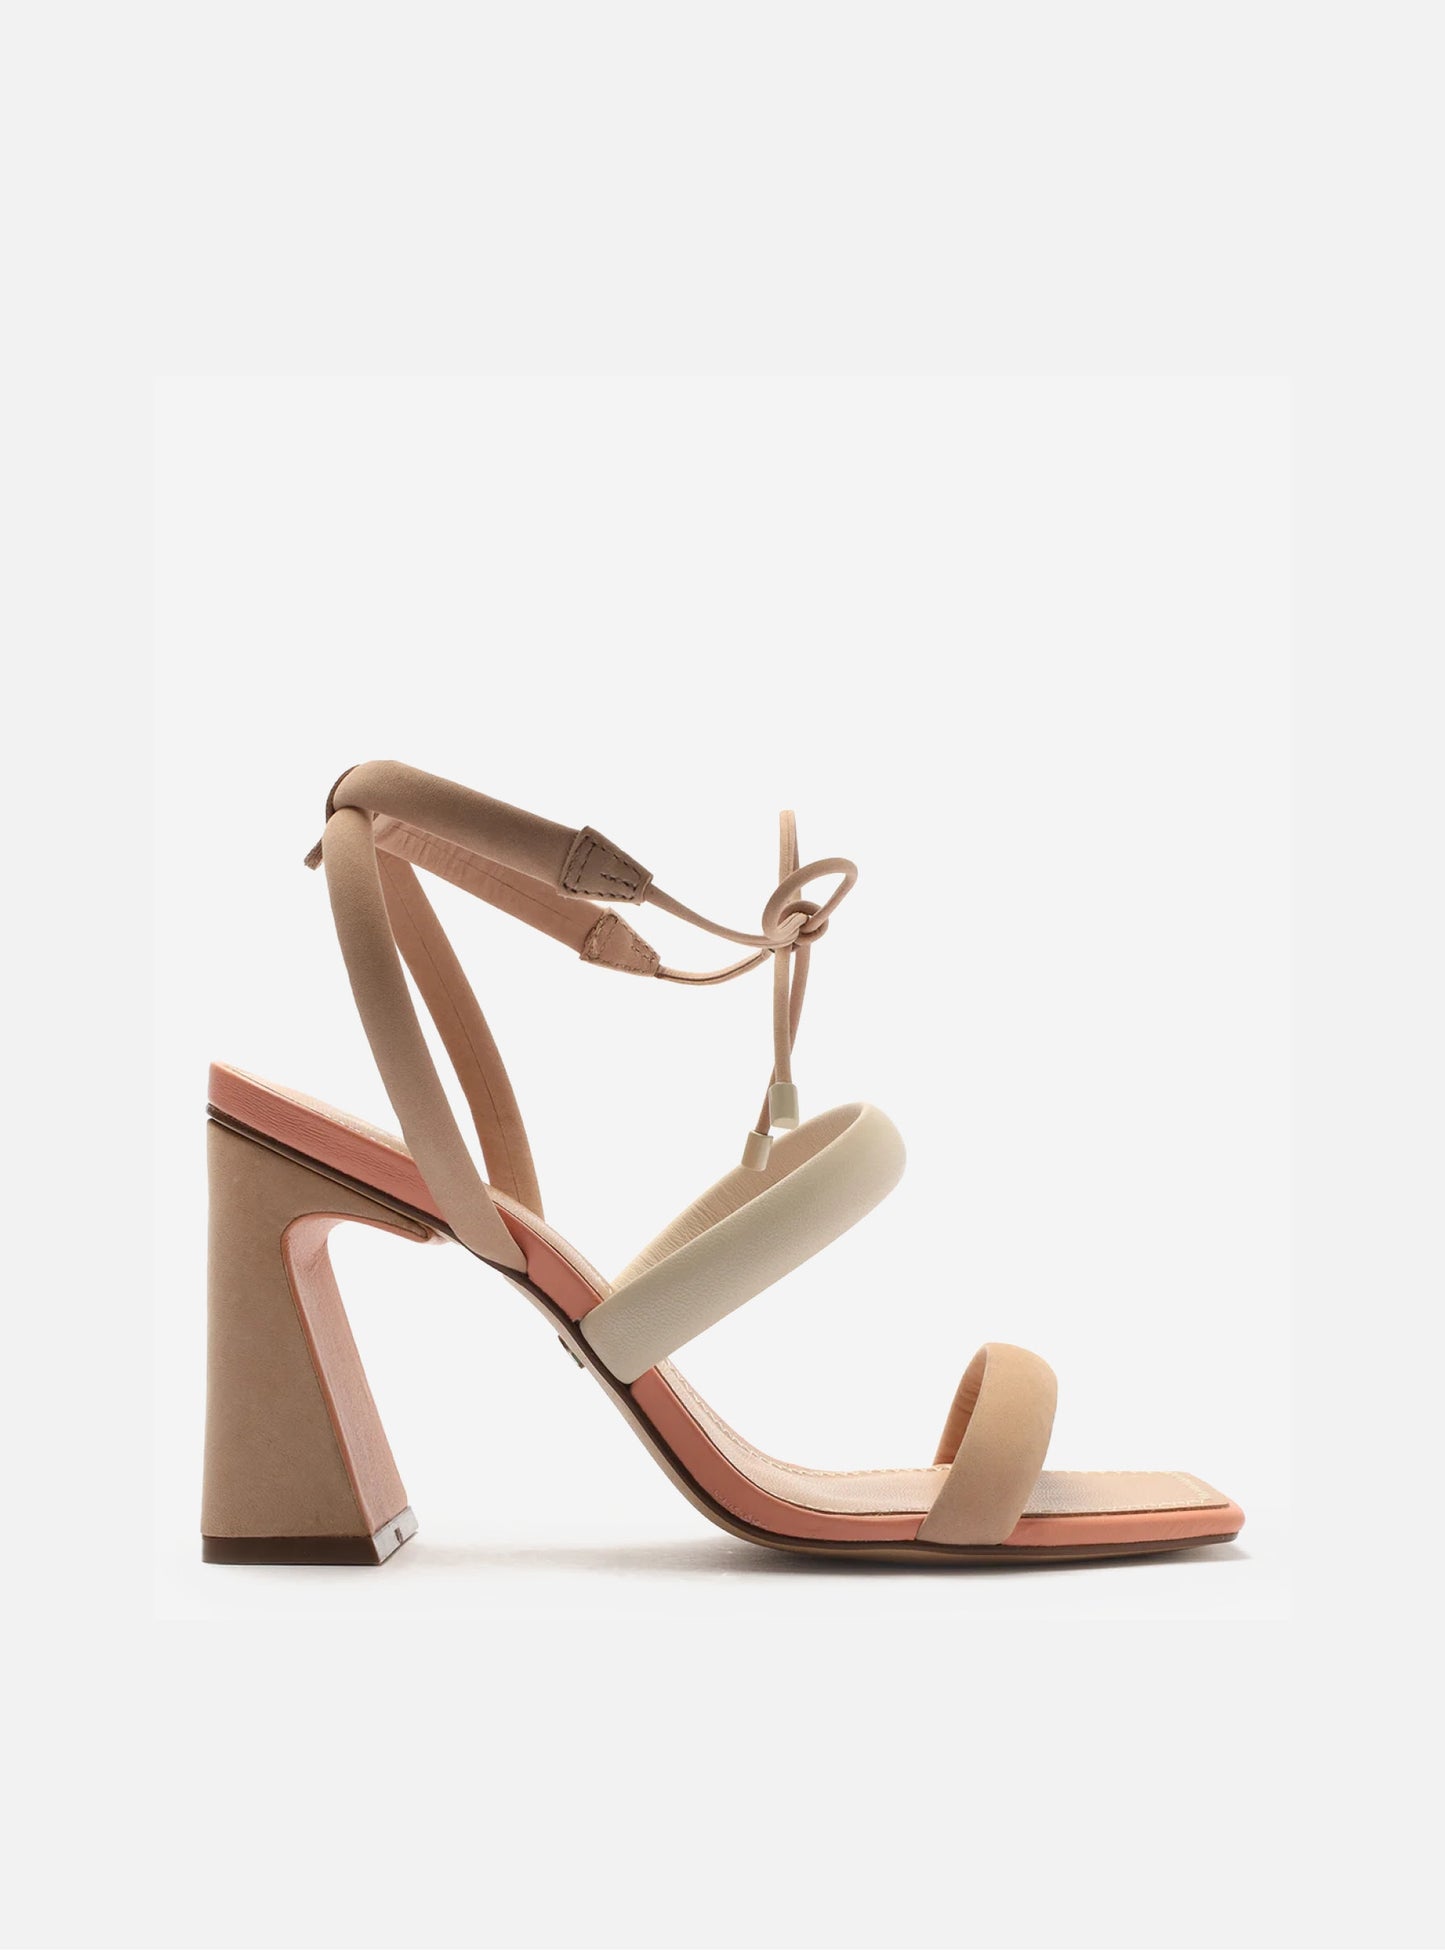 Beige Synthetic Leather Lenny High Block Sandal Side View